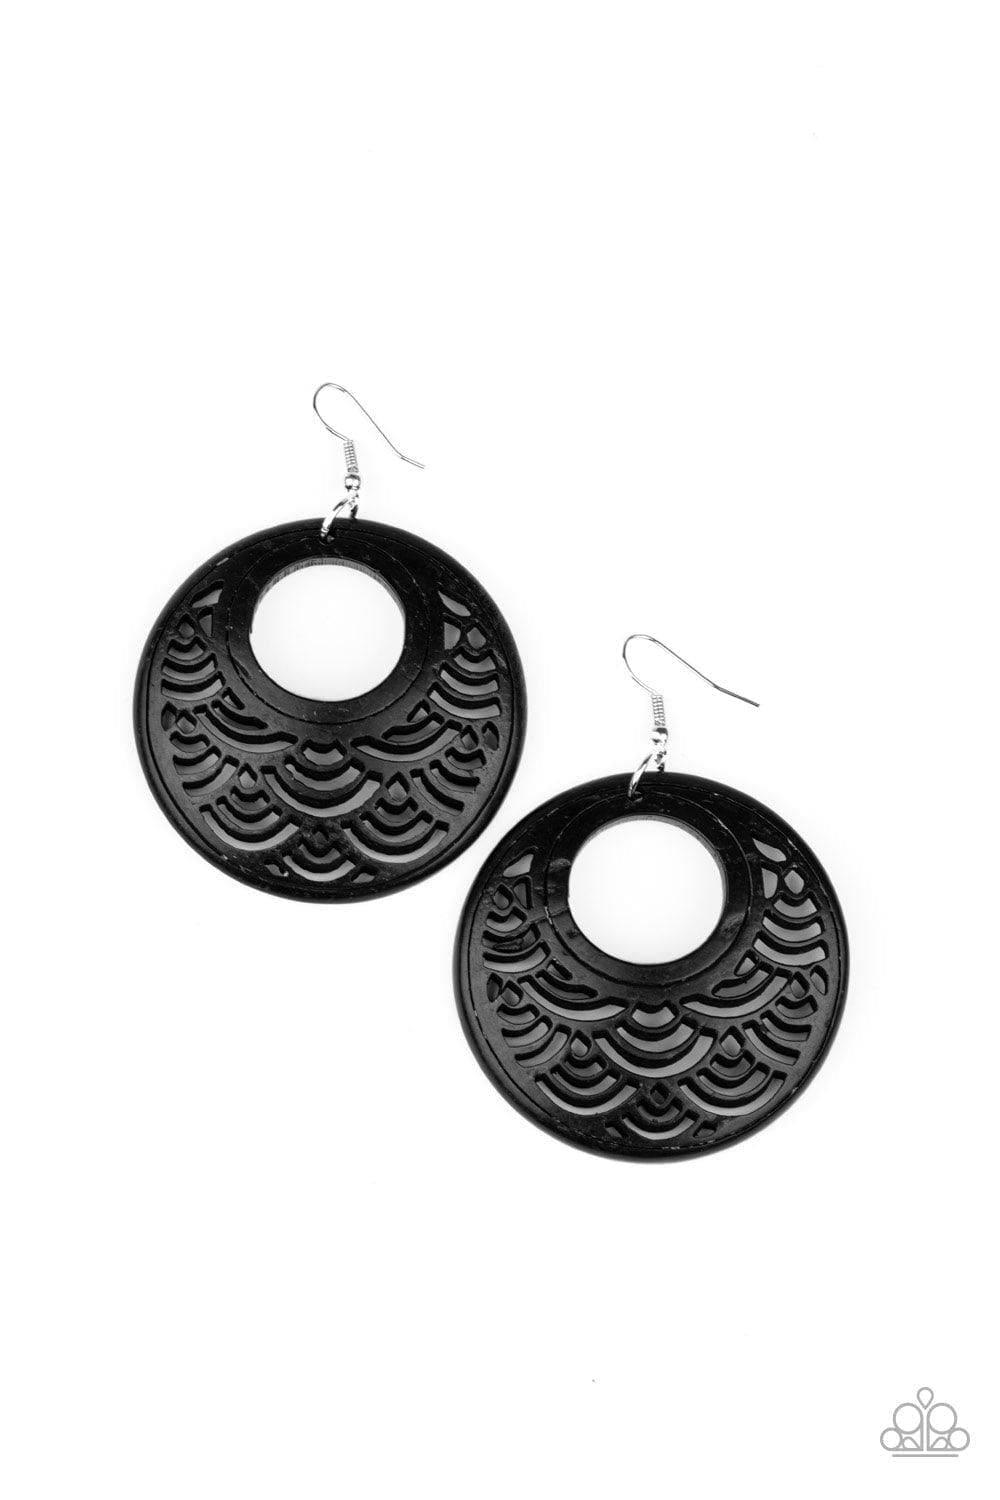 Paparazzi Accessories - Tropical Canopy - Black Earrings - Bling by JessieK